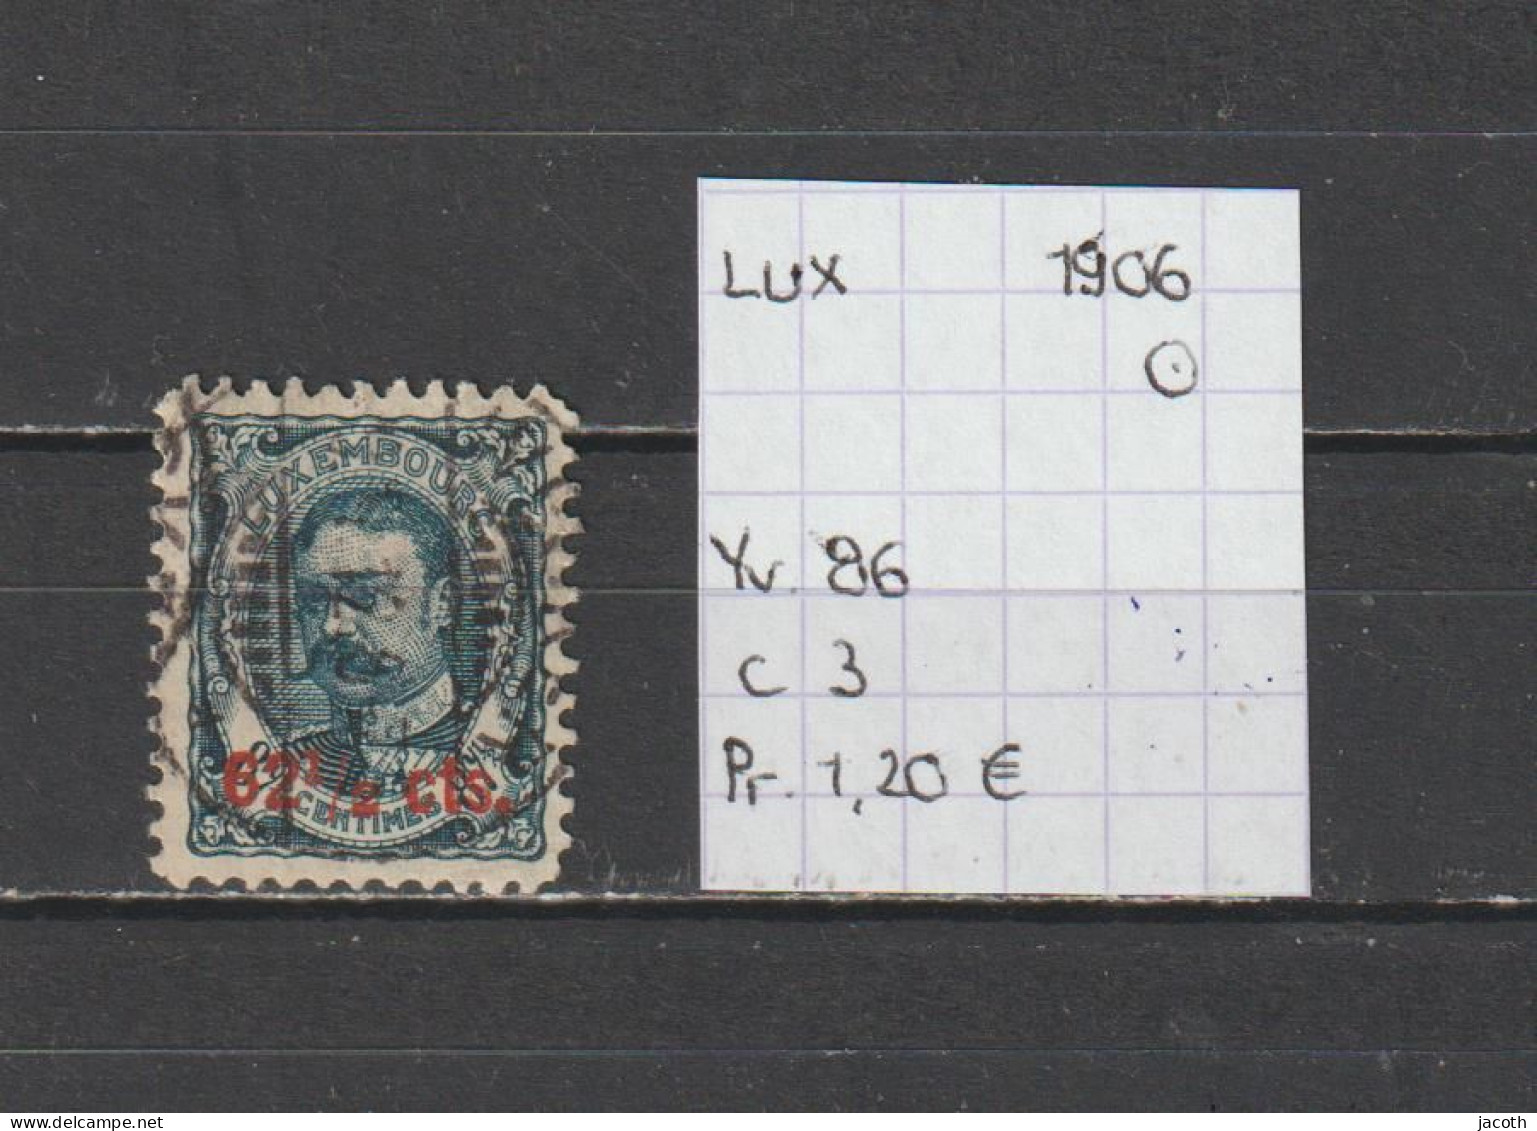 (TJ) Luxembourg 1906 - YT 86 (gest./obl./used) - 1906 Guillaume IV